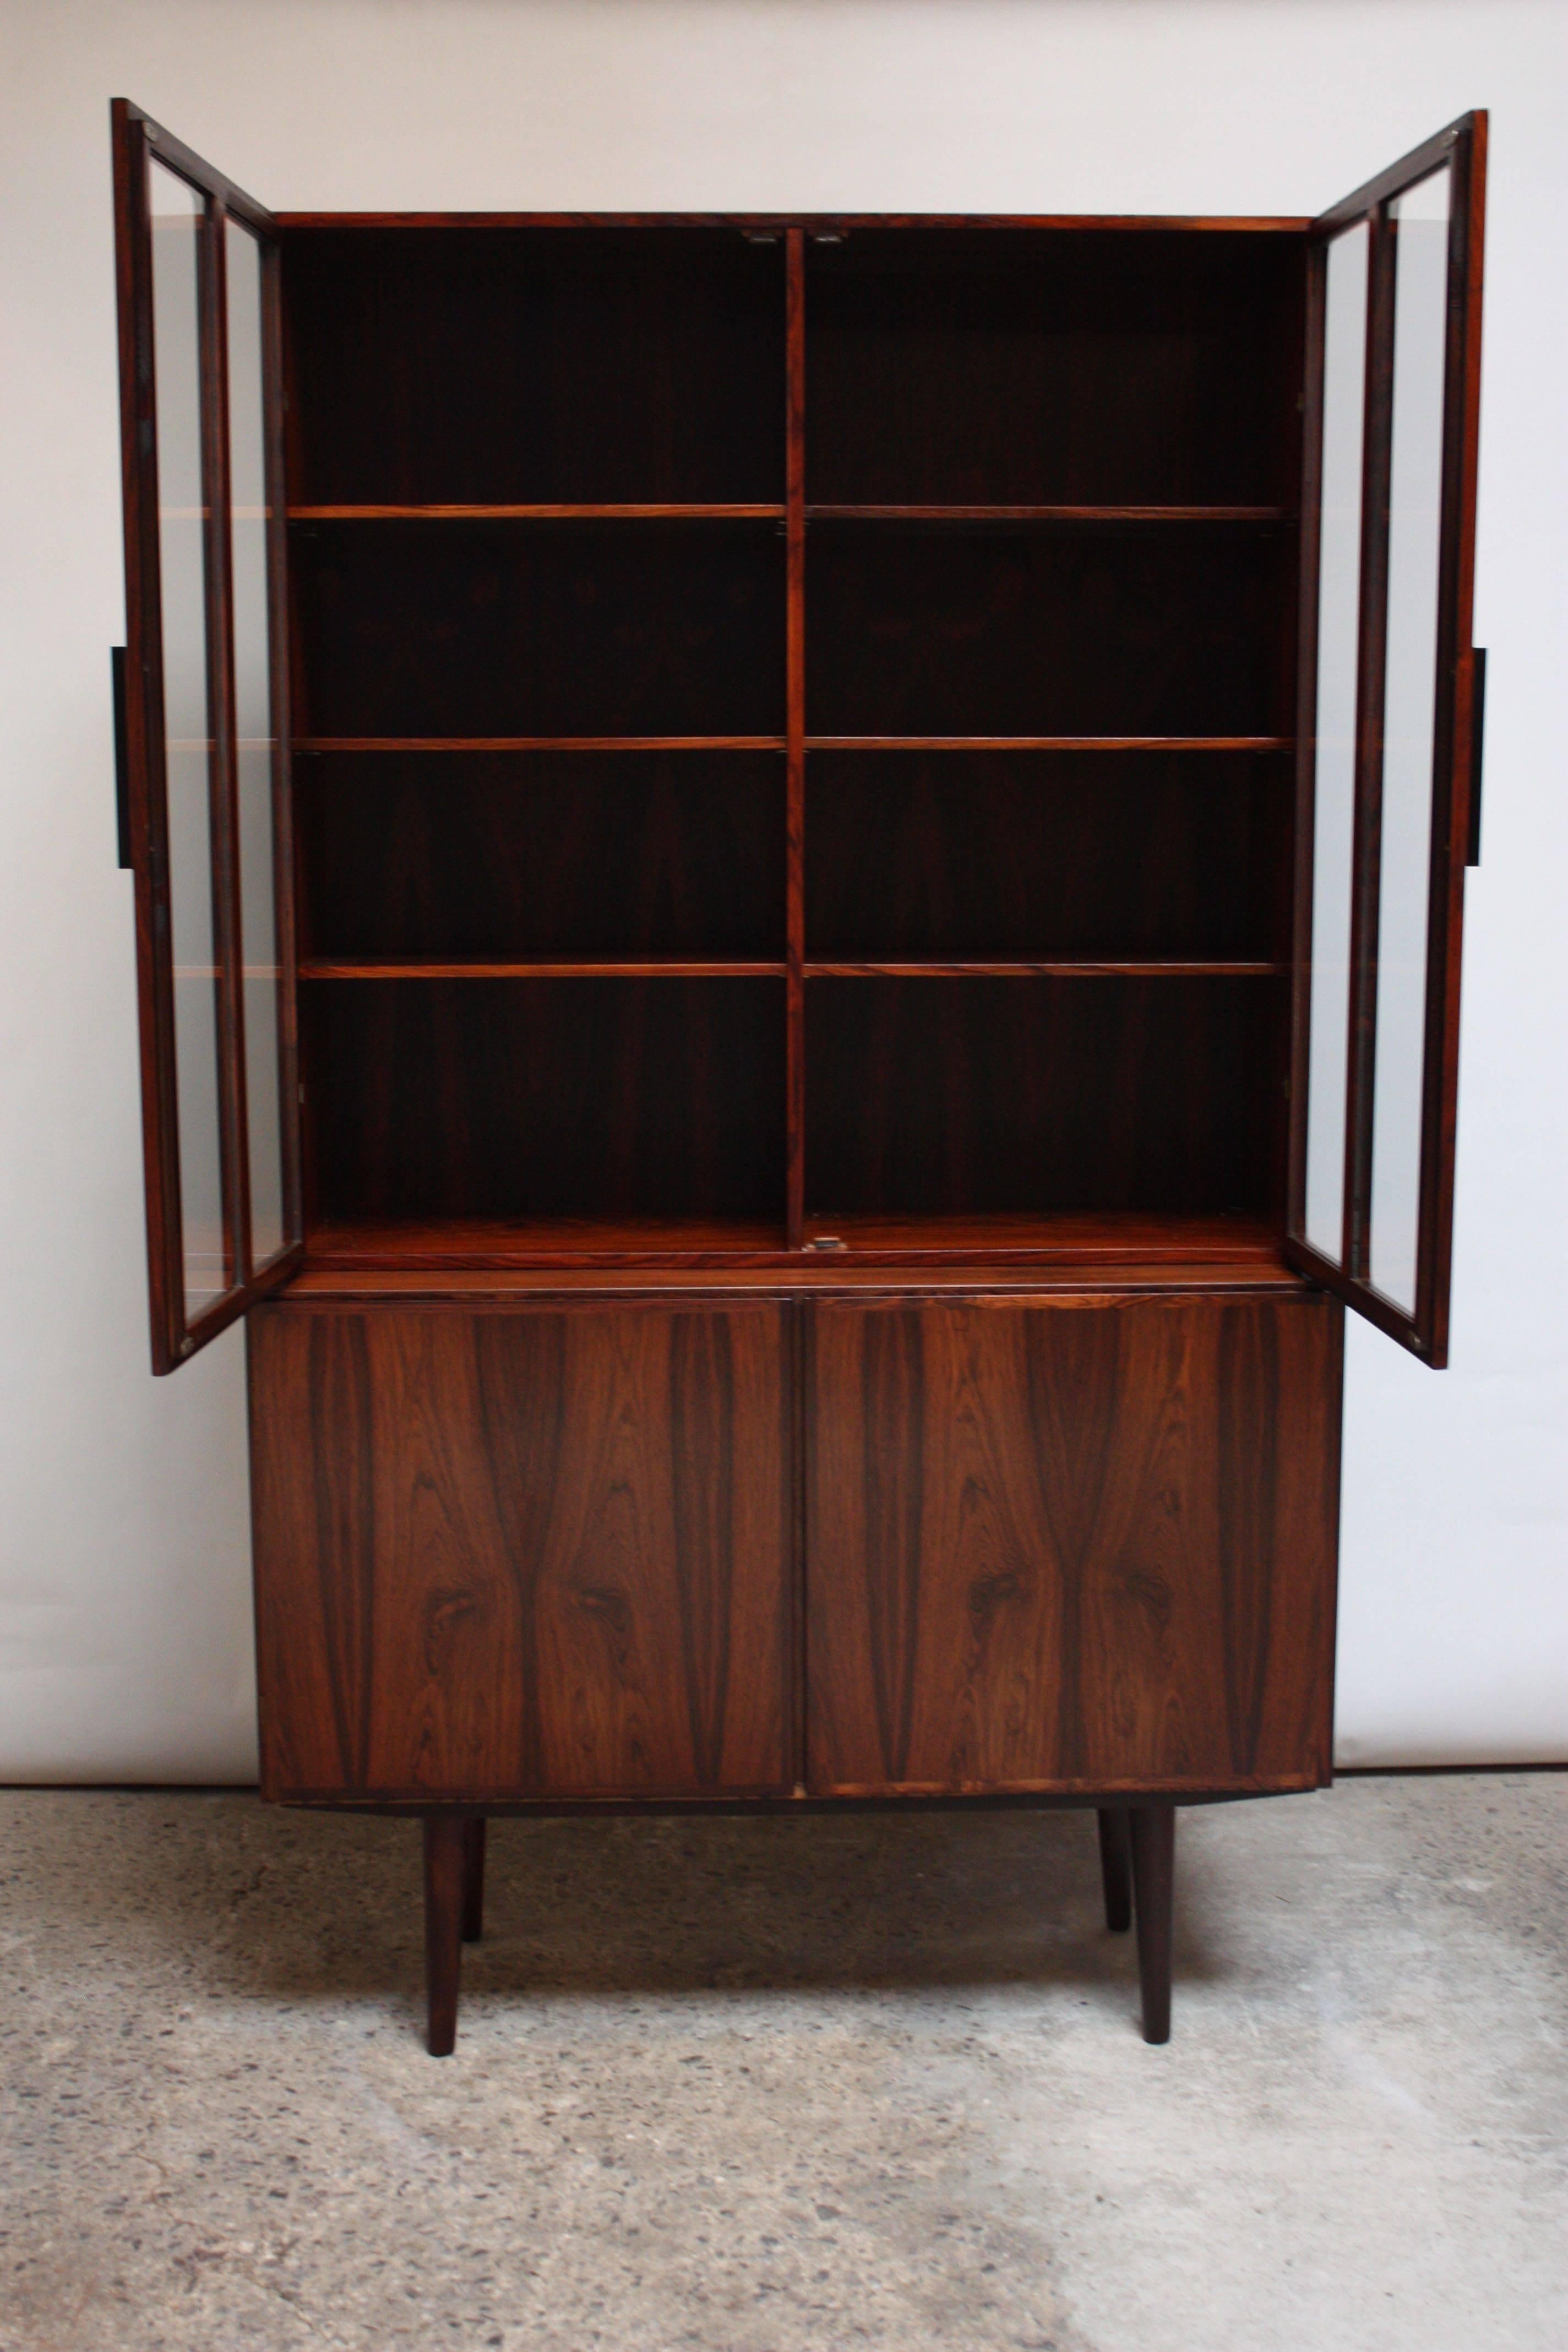 Stunning vitrine with adjustable shelves anchored by a small 2-door cabinet designed by Gunni Omann for Omann Jun. Exquisite bookmatching and vivid rosewood grain. The top case's doors with black metal pulls open to reveal three adjustable shelves /